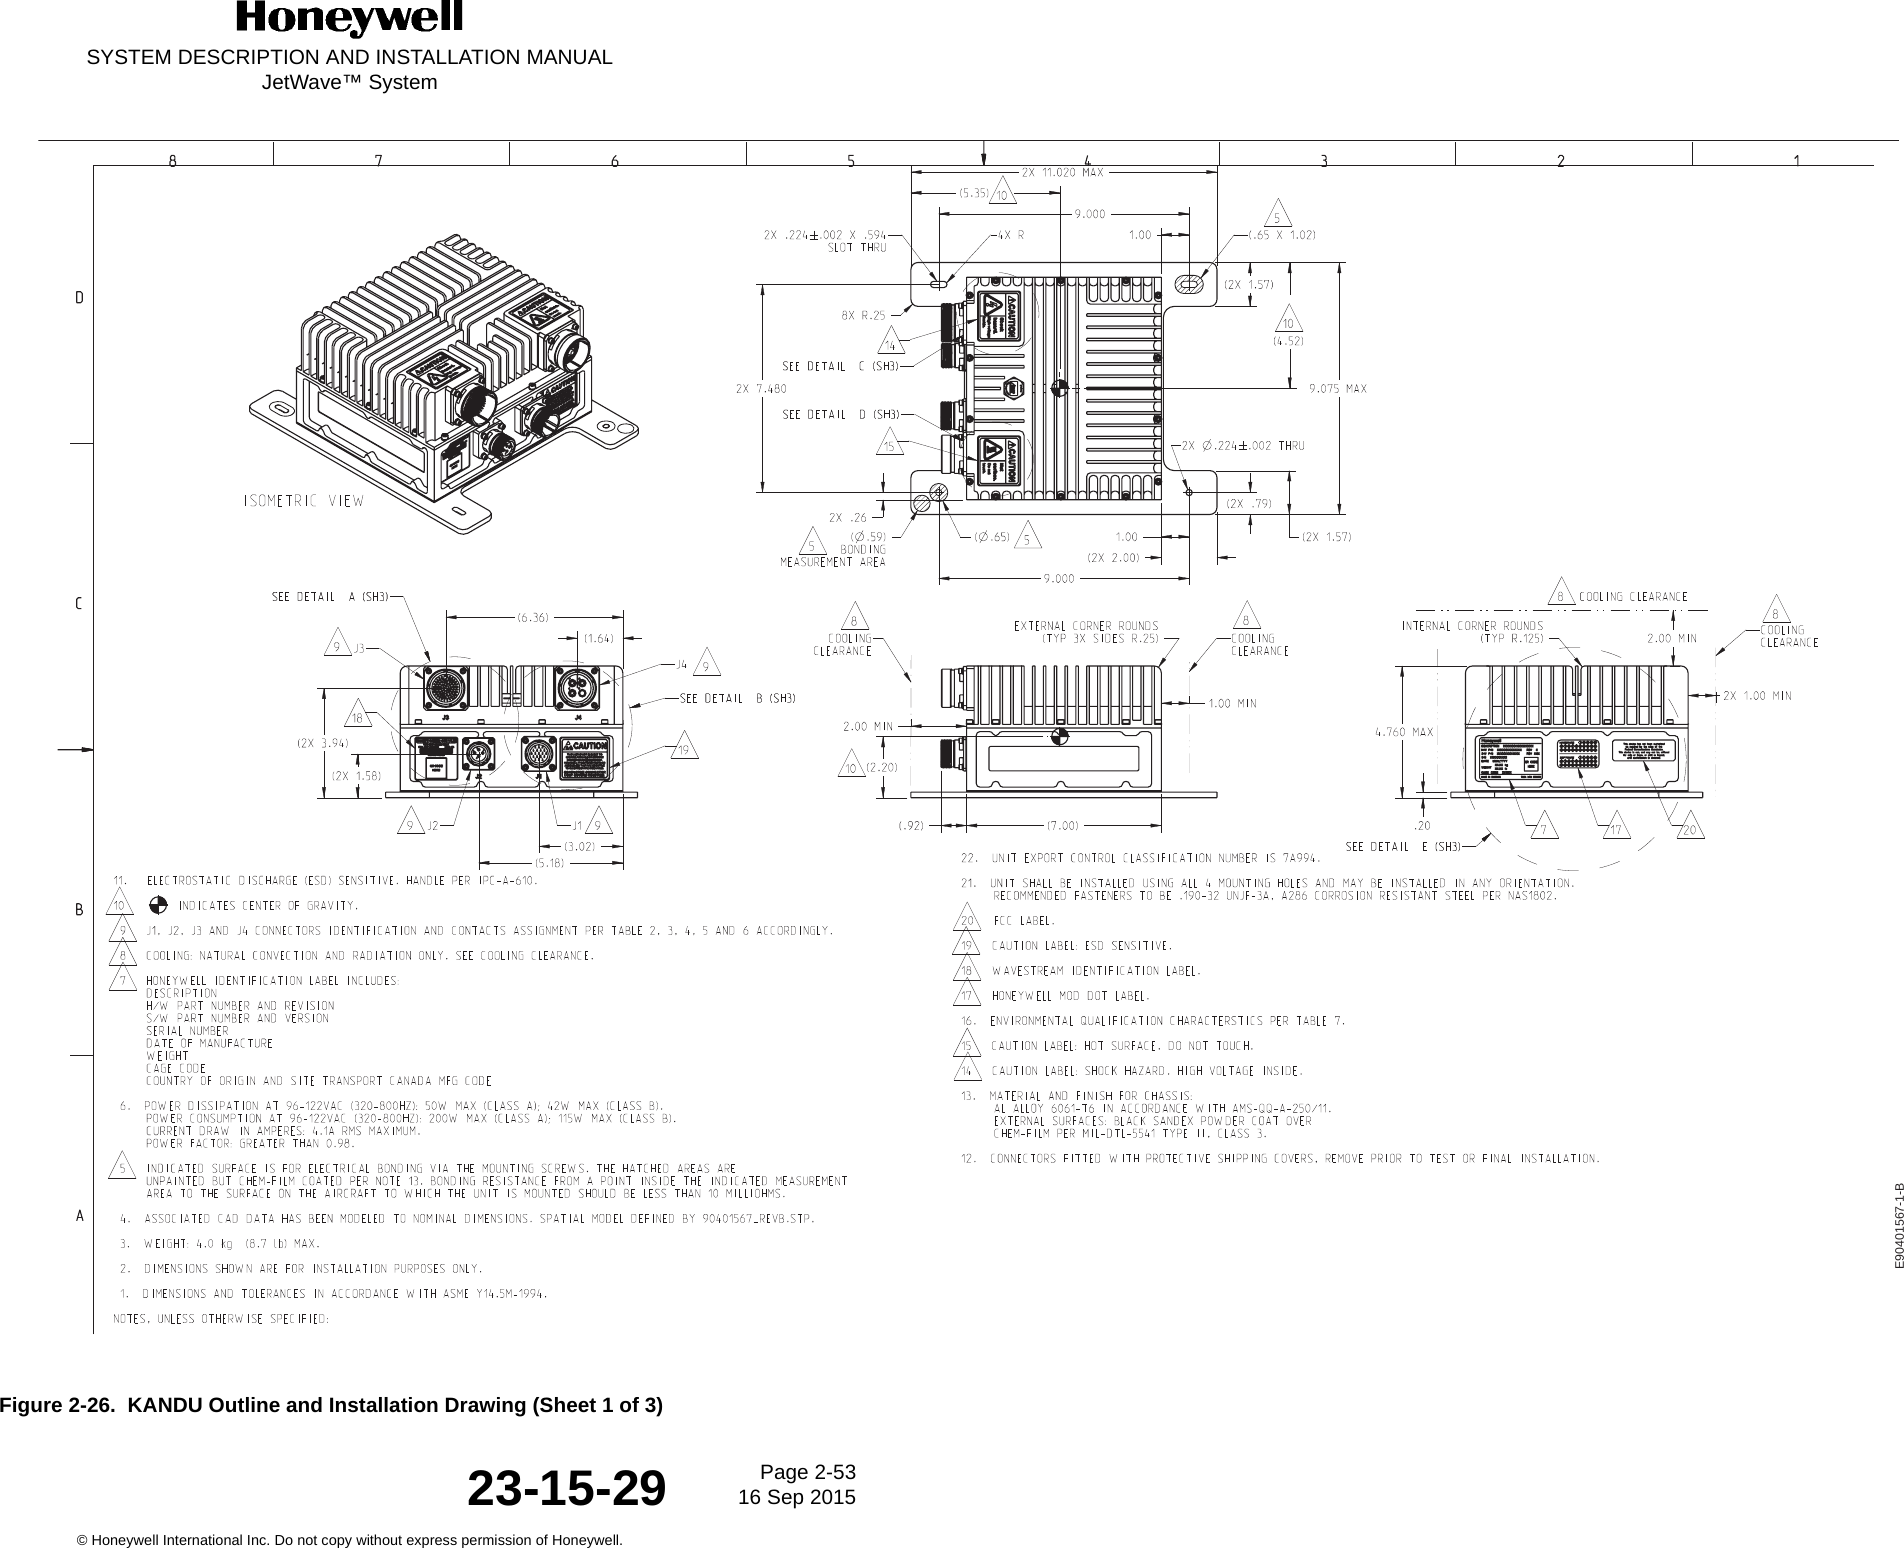 SYSTEM DESCRIPTION AND INSTALLATION MANUALJetWave™ SystemPage 2-53 16 Sep 2015© Honeywell International Inc. Do not copy without express permission of Honeywell.23-15-29Figure 2-26.  KANDU Outline and Installation Drawing (Sheet 1 of 3)E90401567-1-B